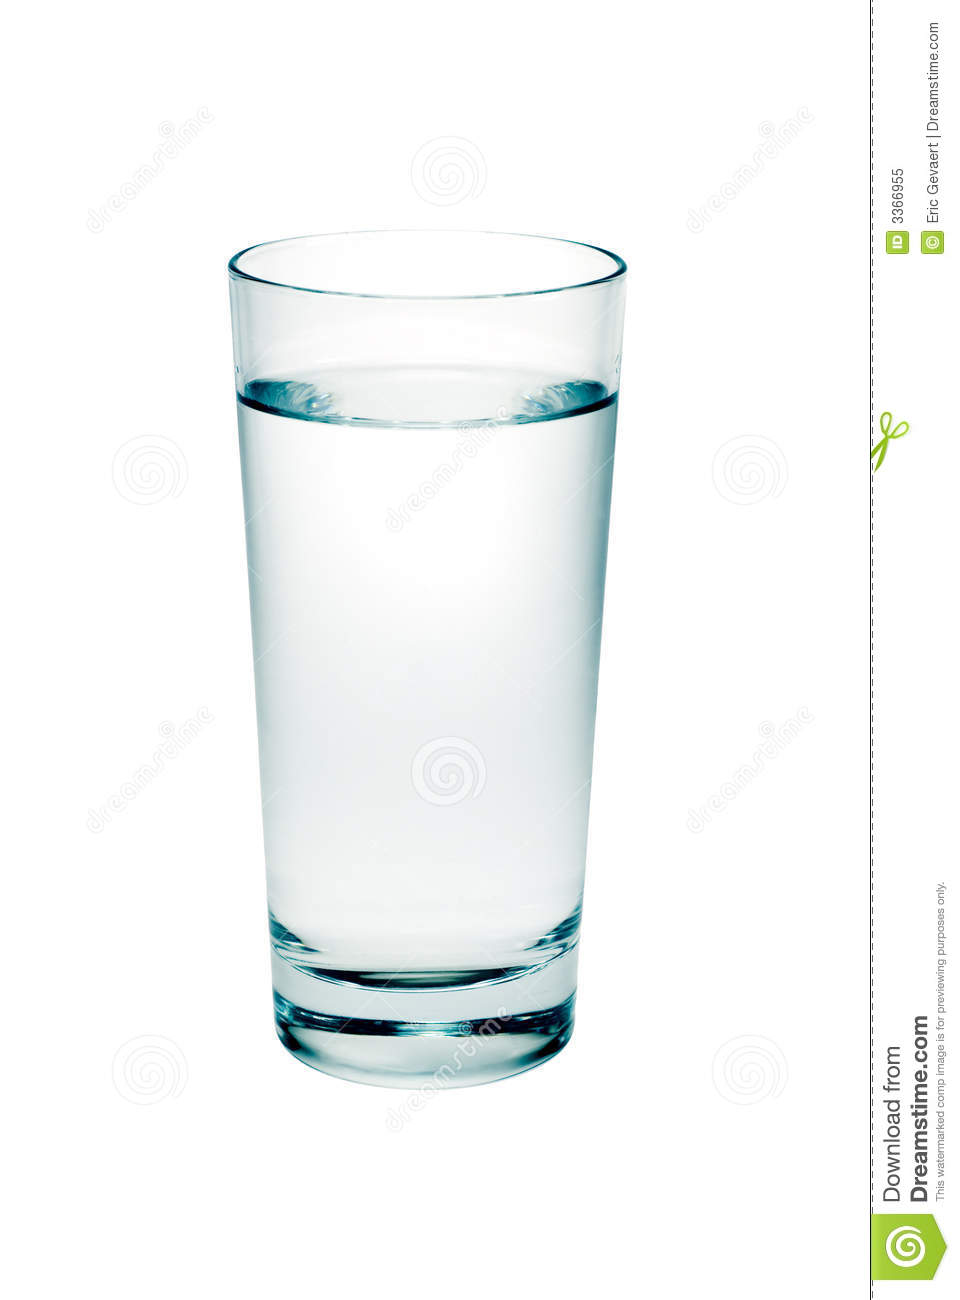 Glass of Water Clipart. 15 11